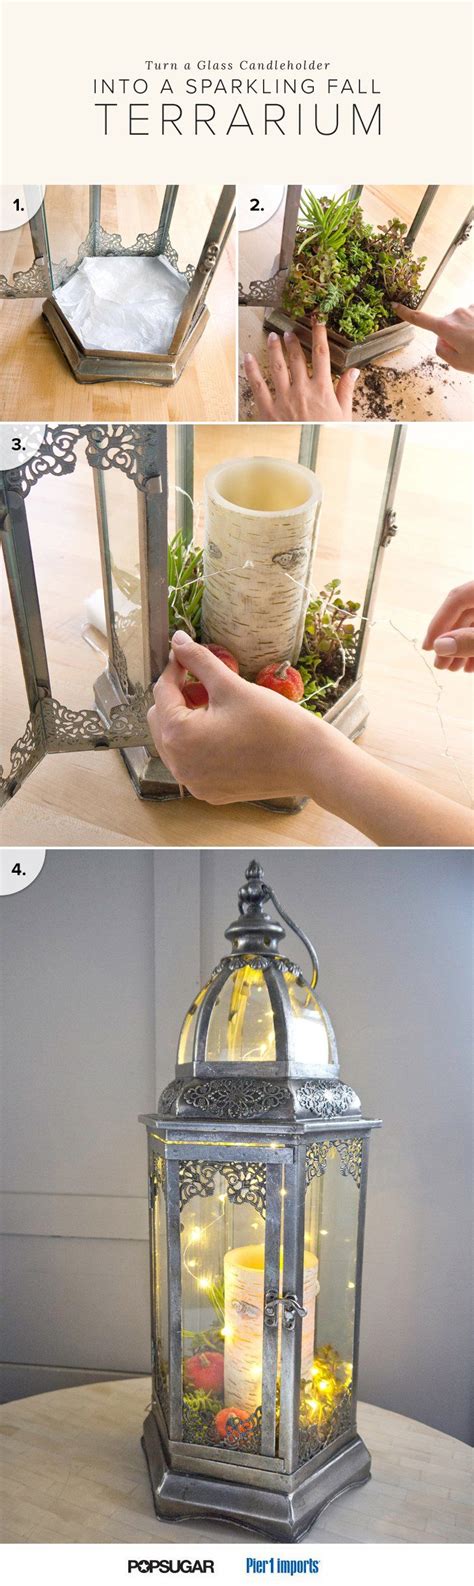 Pin For Later Turn A Glass Candle Holder Into A Sparkling Fall